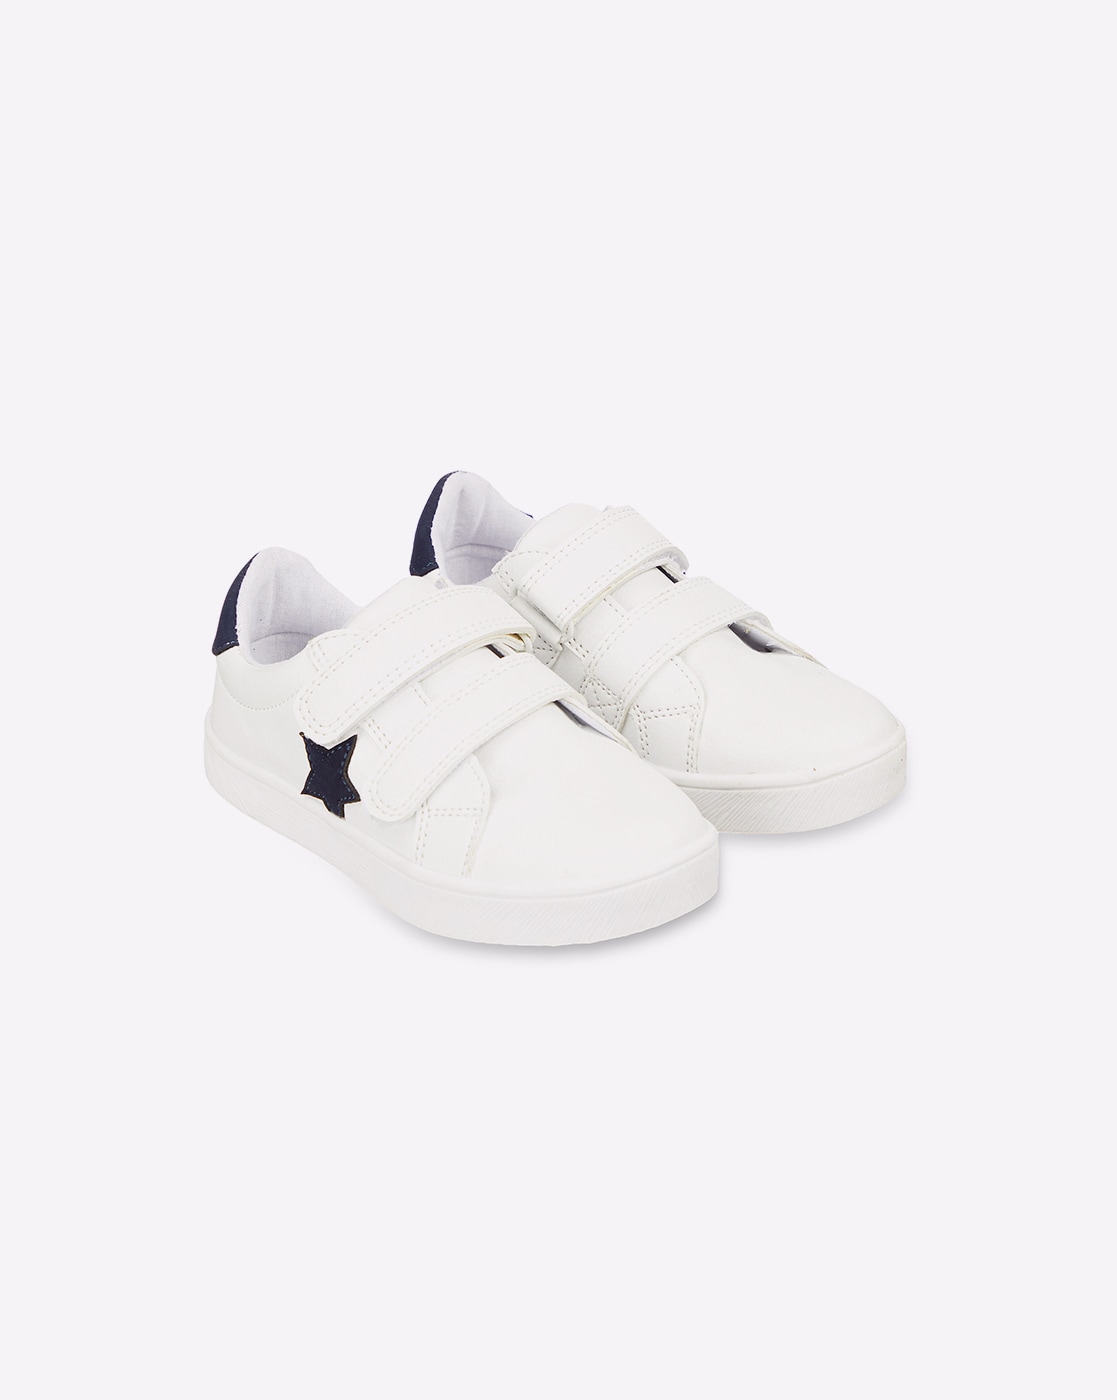 Buy White Sports\u0026Outdoor Shoes for Boys 